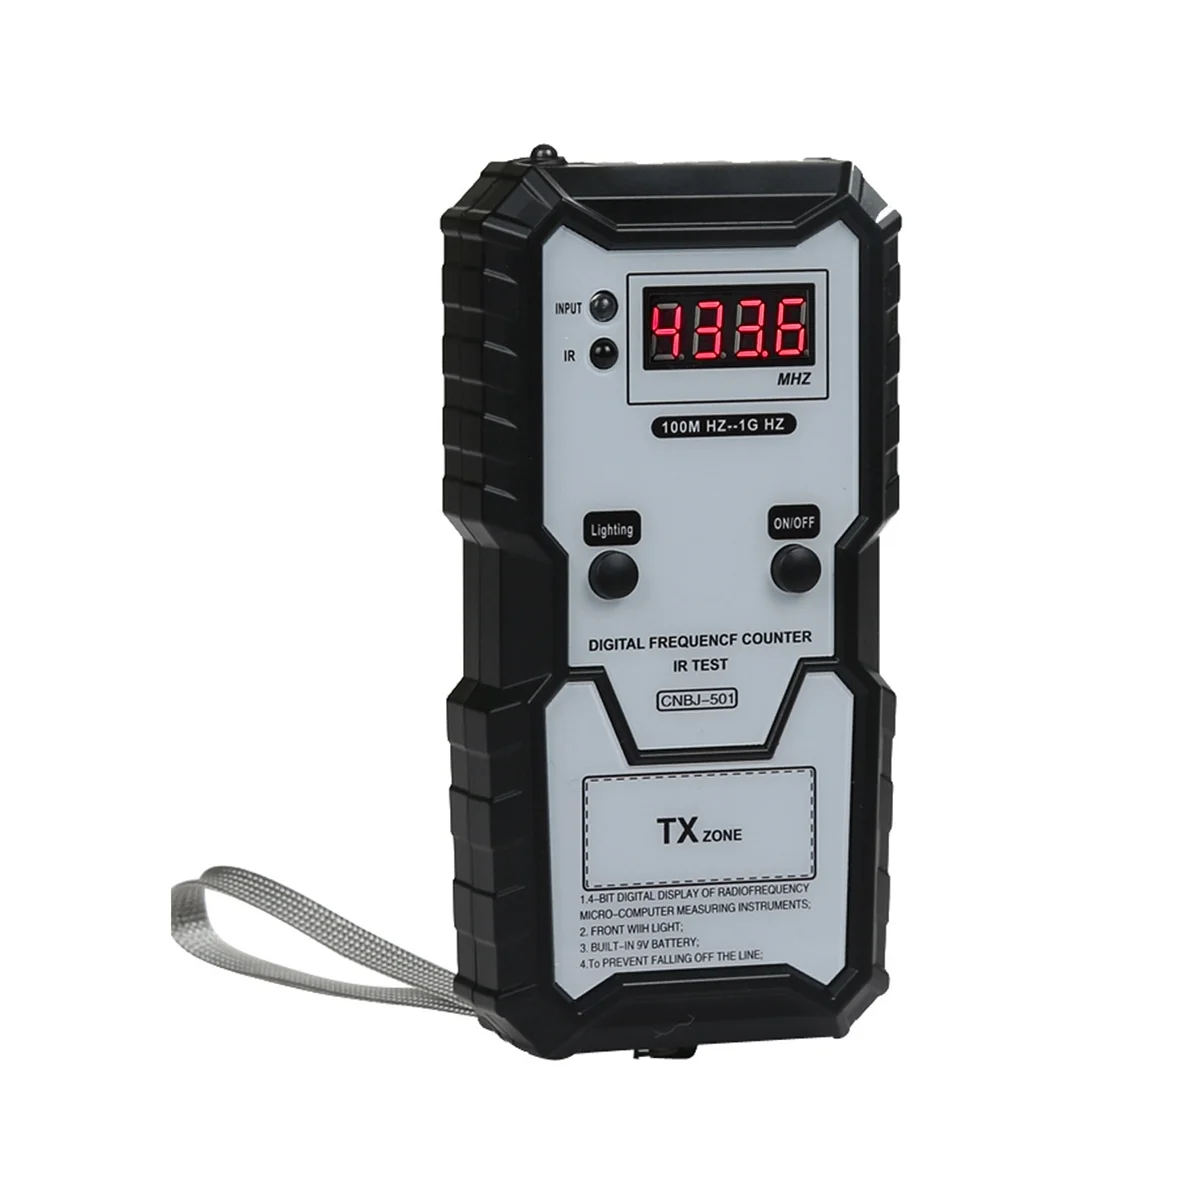 

Car Infrared Frequency Tester 100M-1GHZ 4-Bit Digital Electronic IR Frequence Counter Tester with Illumination